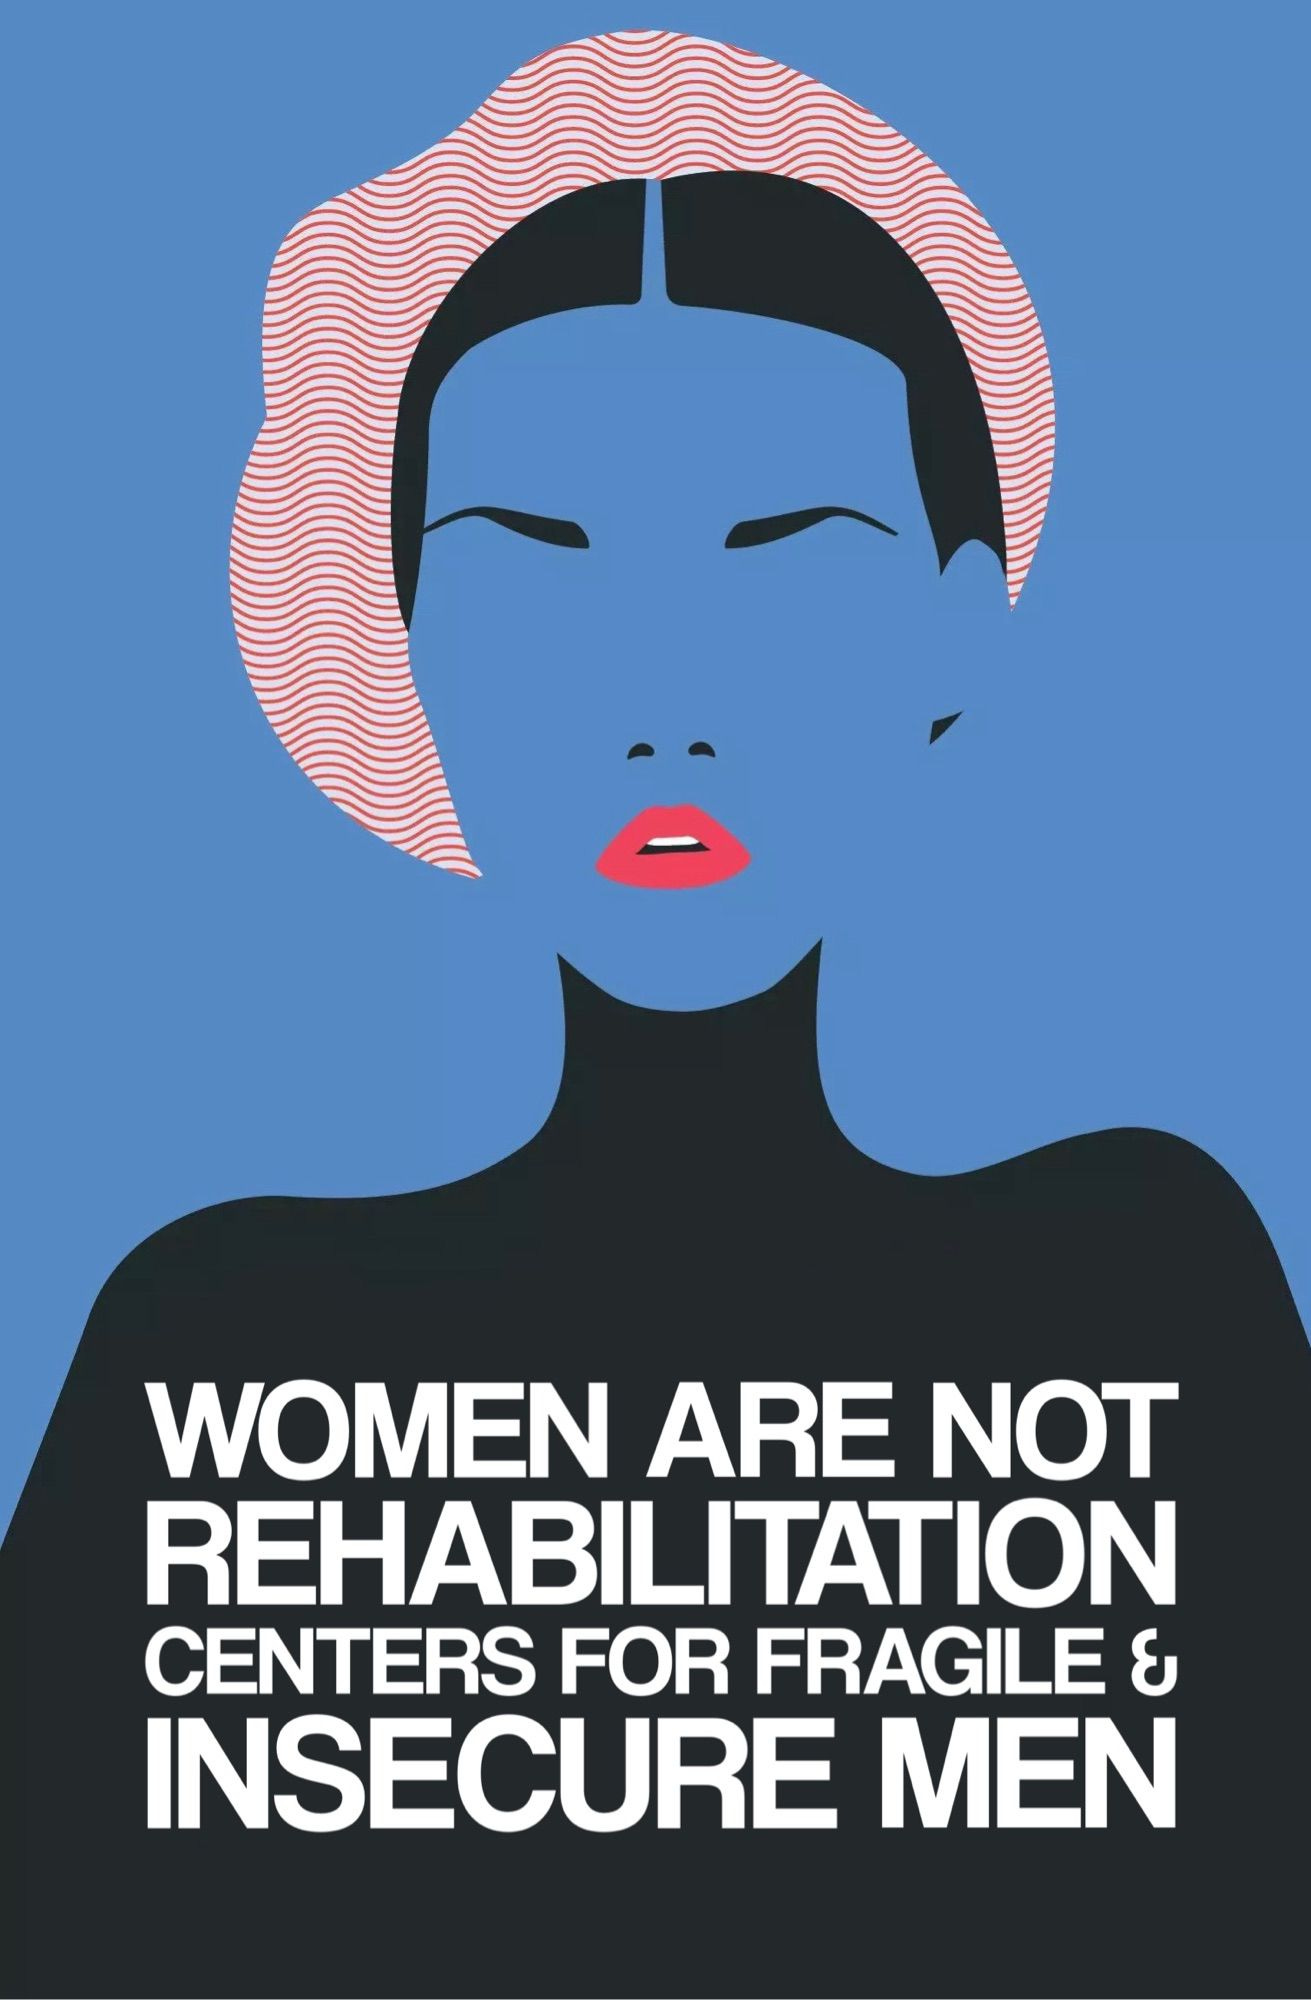 Women are not rehabilitation centers for unstable and fragile men.